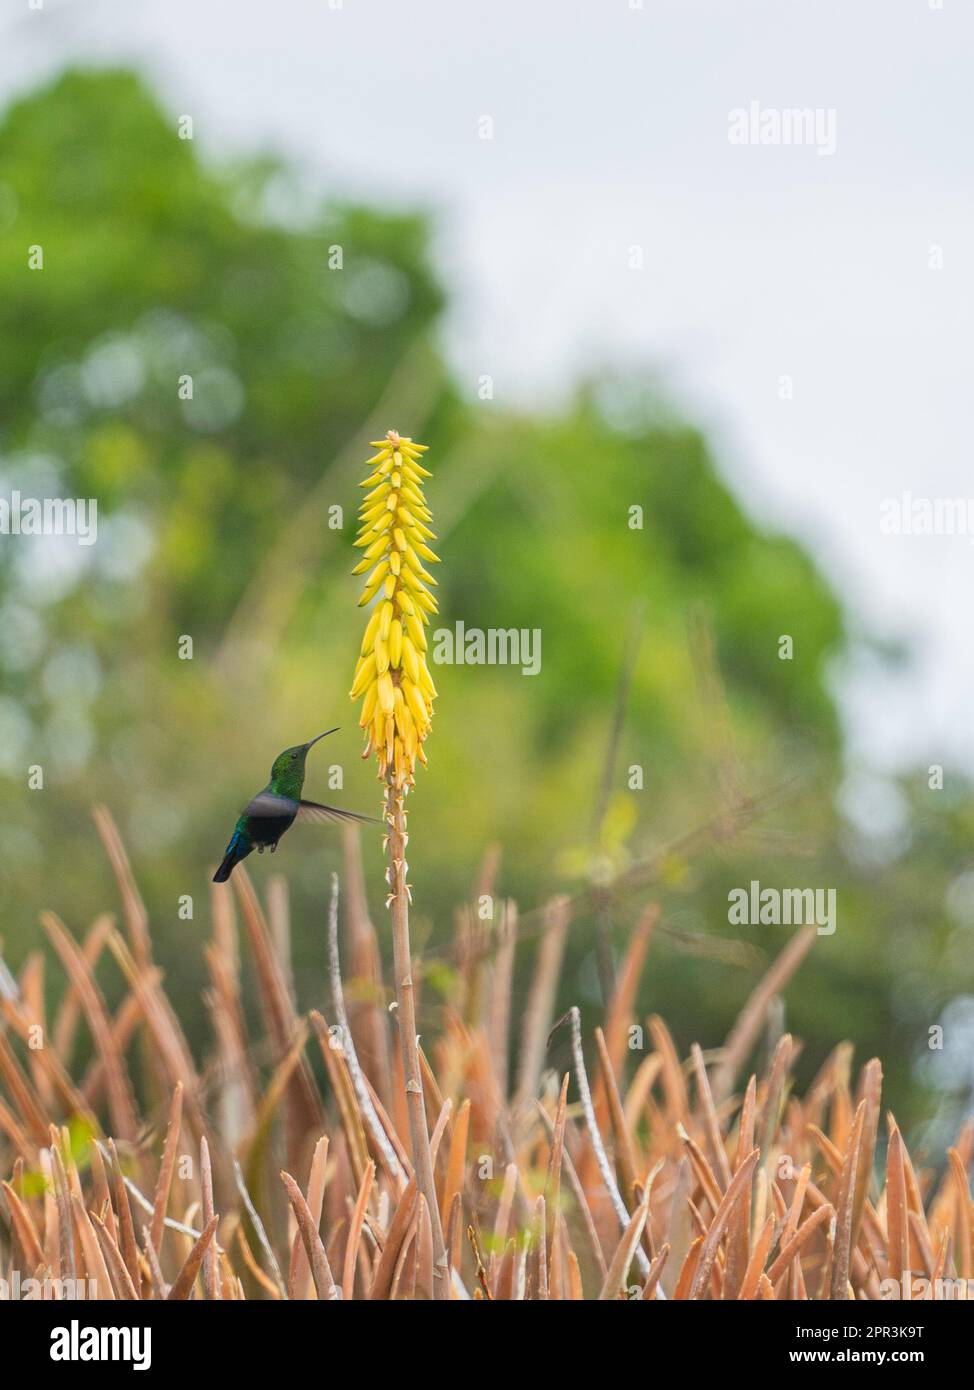 A close-up shot of a small Green-throated carib flying around a yellow Kniphofia in the field Stock Photo